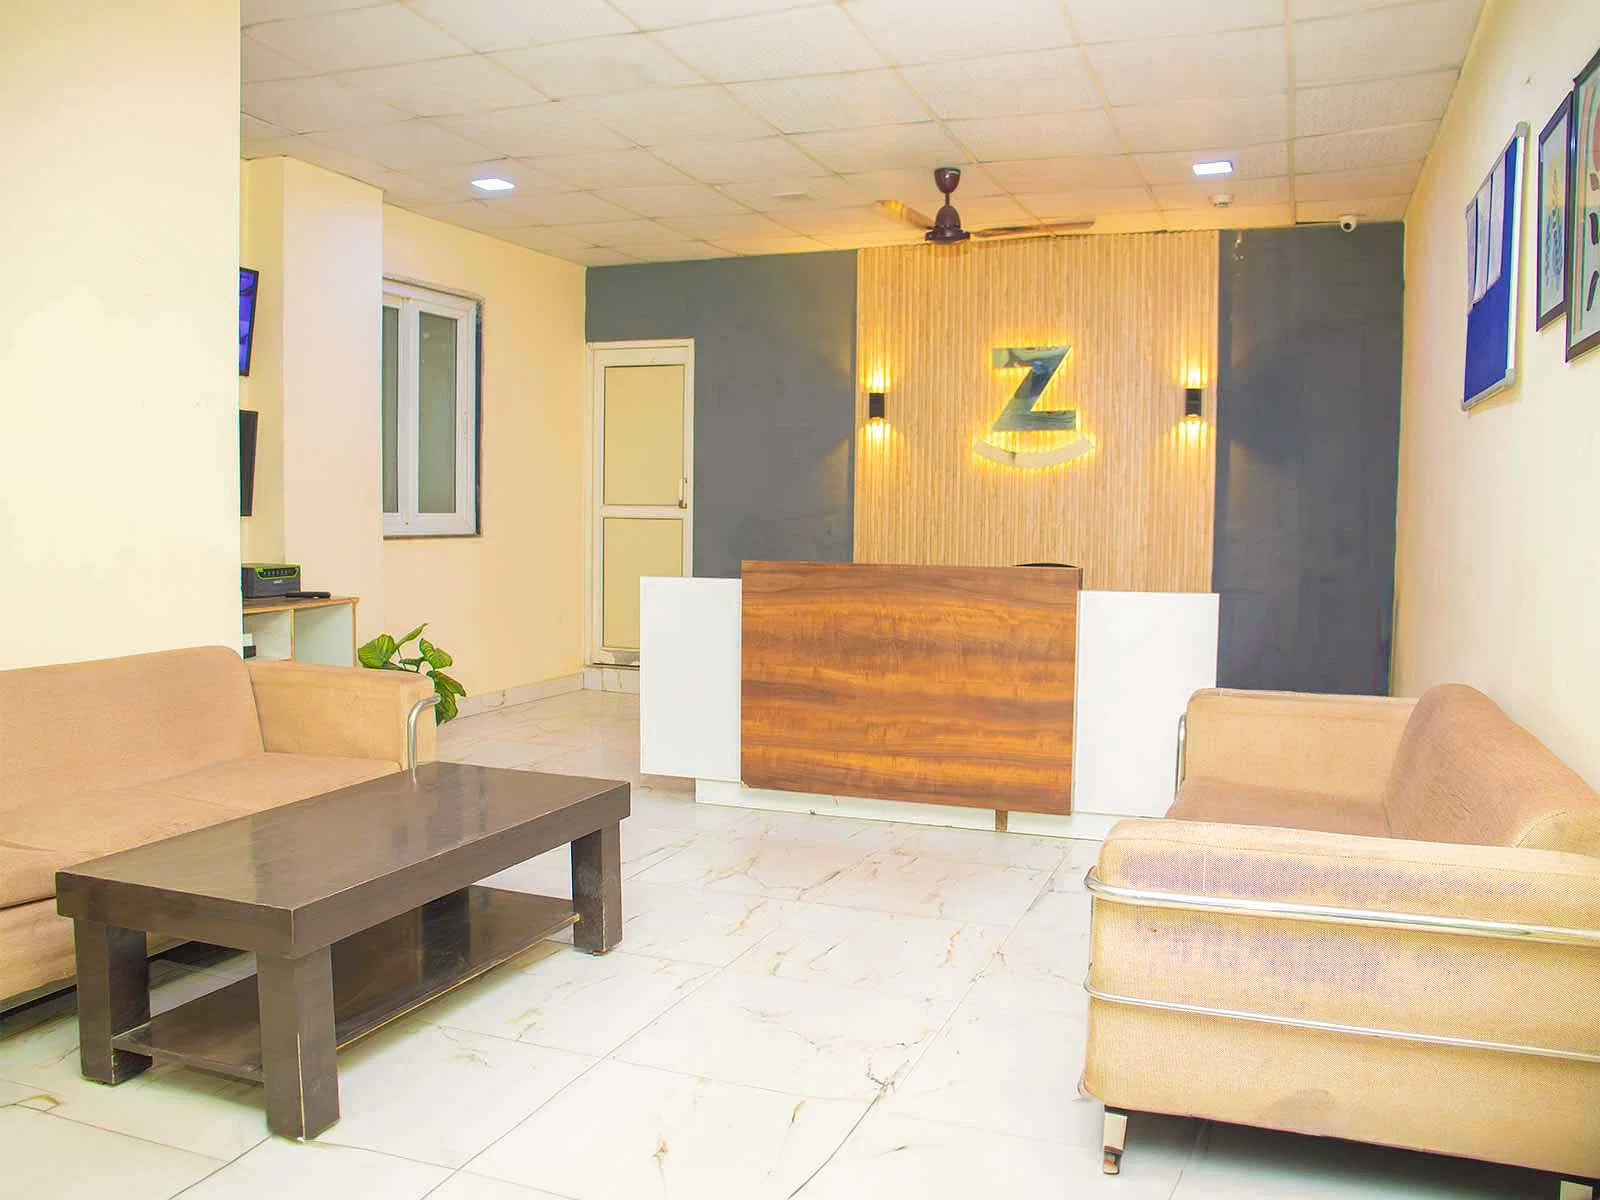 safe and affordable hostels for couple students with 24/7 security and CCTV surveillance-Zolo Frontier